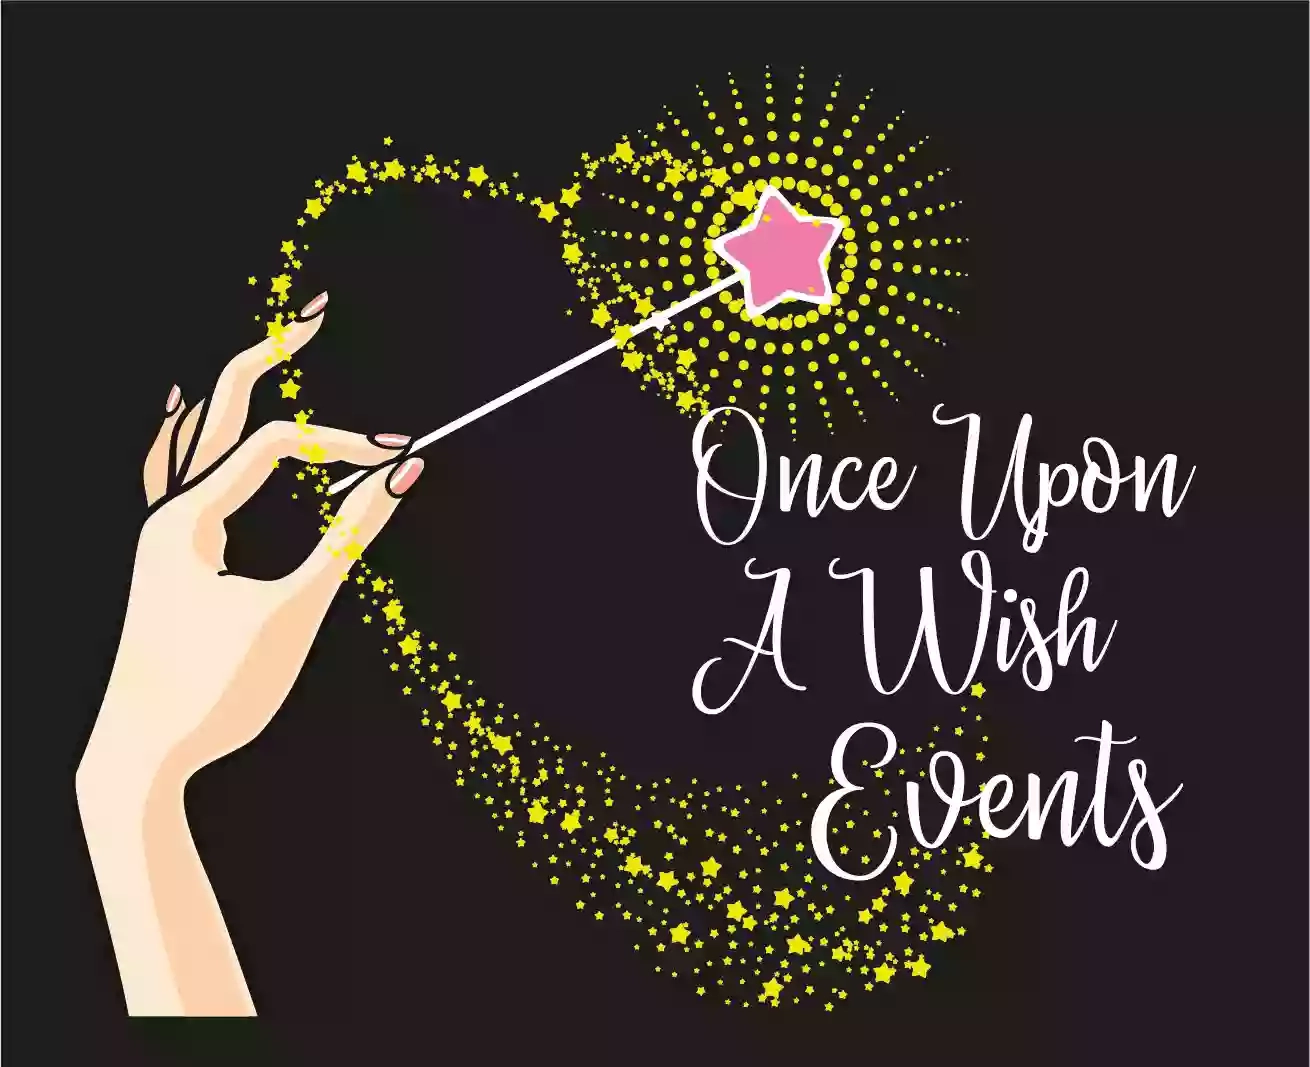 Once Upon a Wish Events